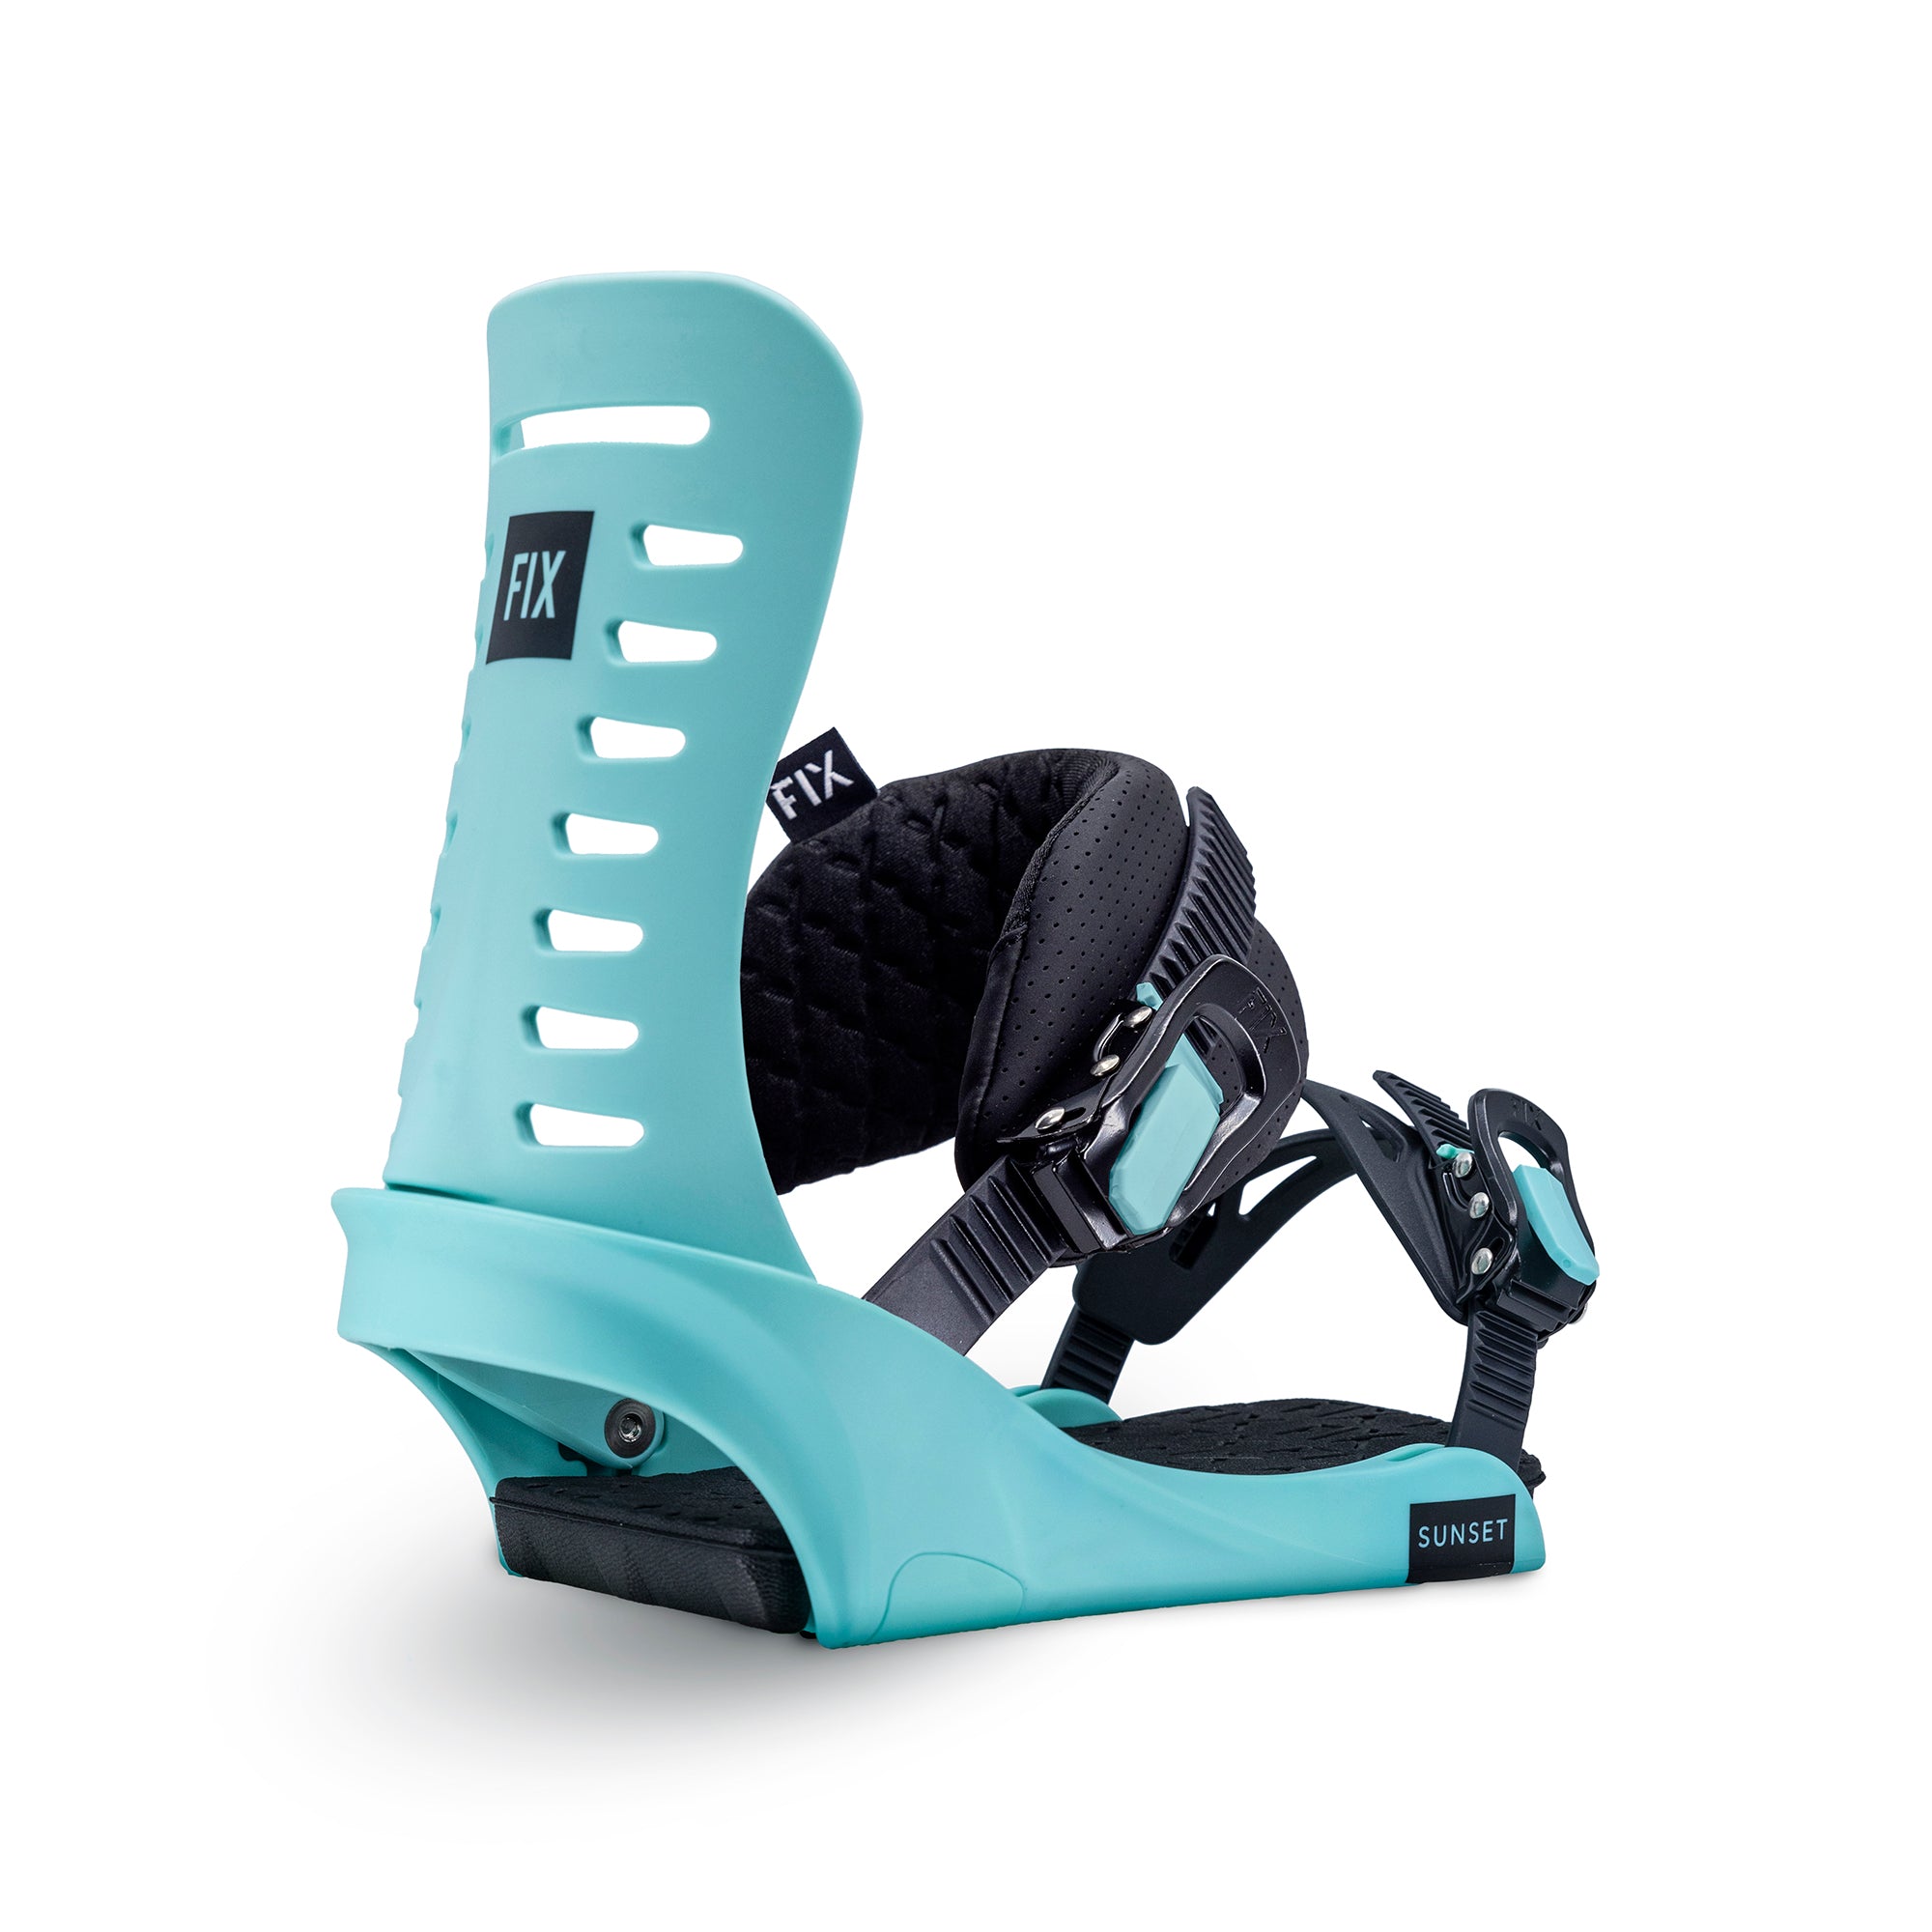 Fix Binding Company - Sunset Bindings - women's all-mountain snowboard bindings - TEAL Color, now sold by Paradise Skis for our all-mountain, freeride, unisex snowboard - The Flamingo